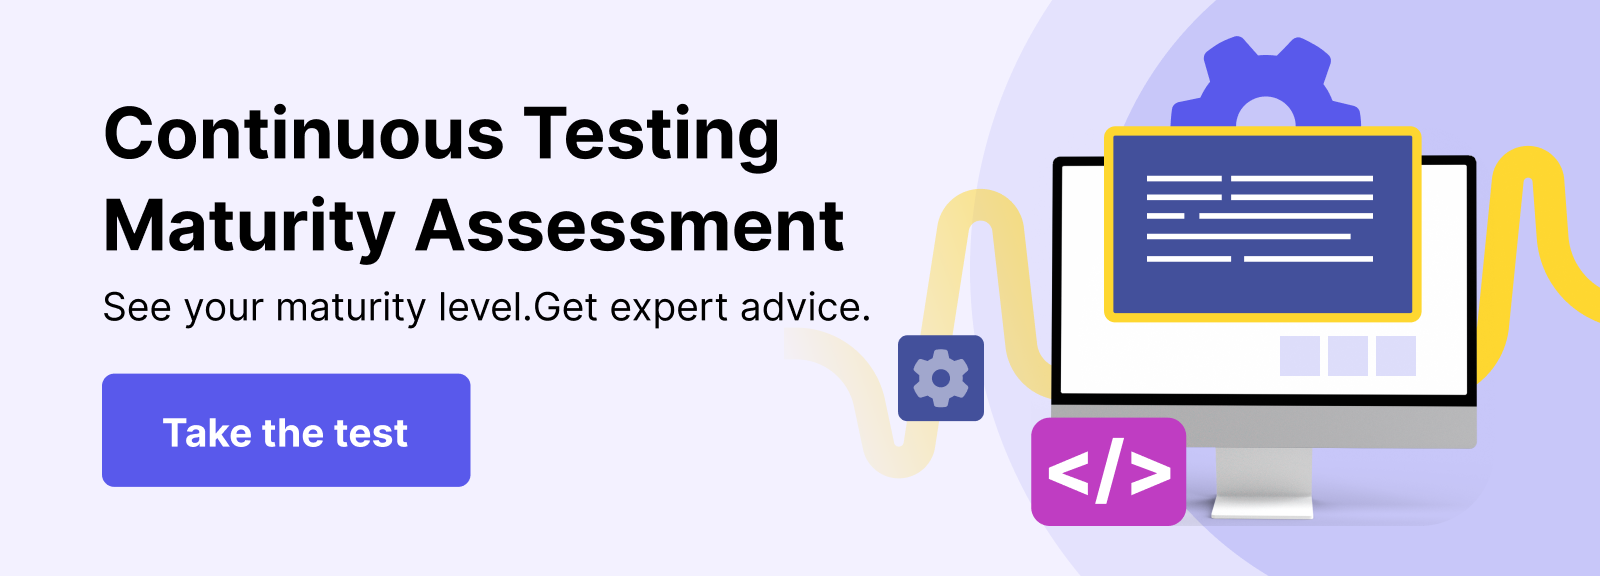 Continuous testing maturity assessment